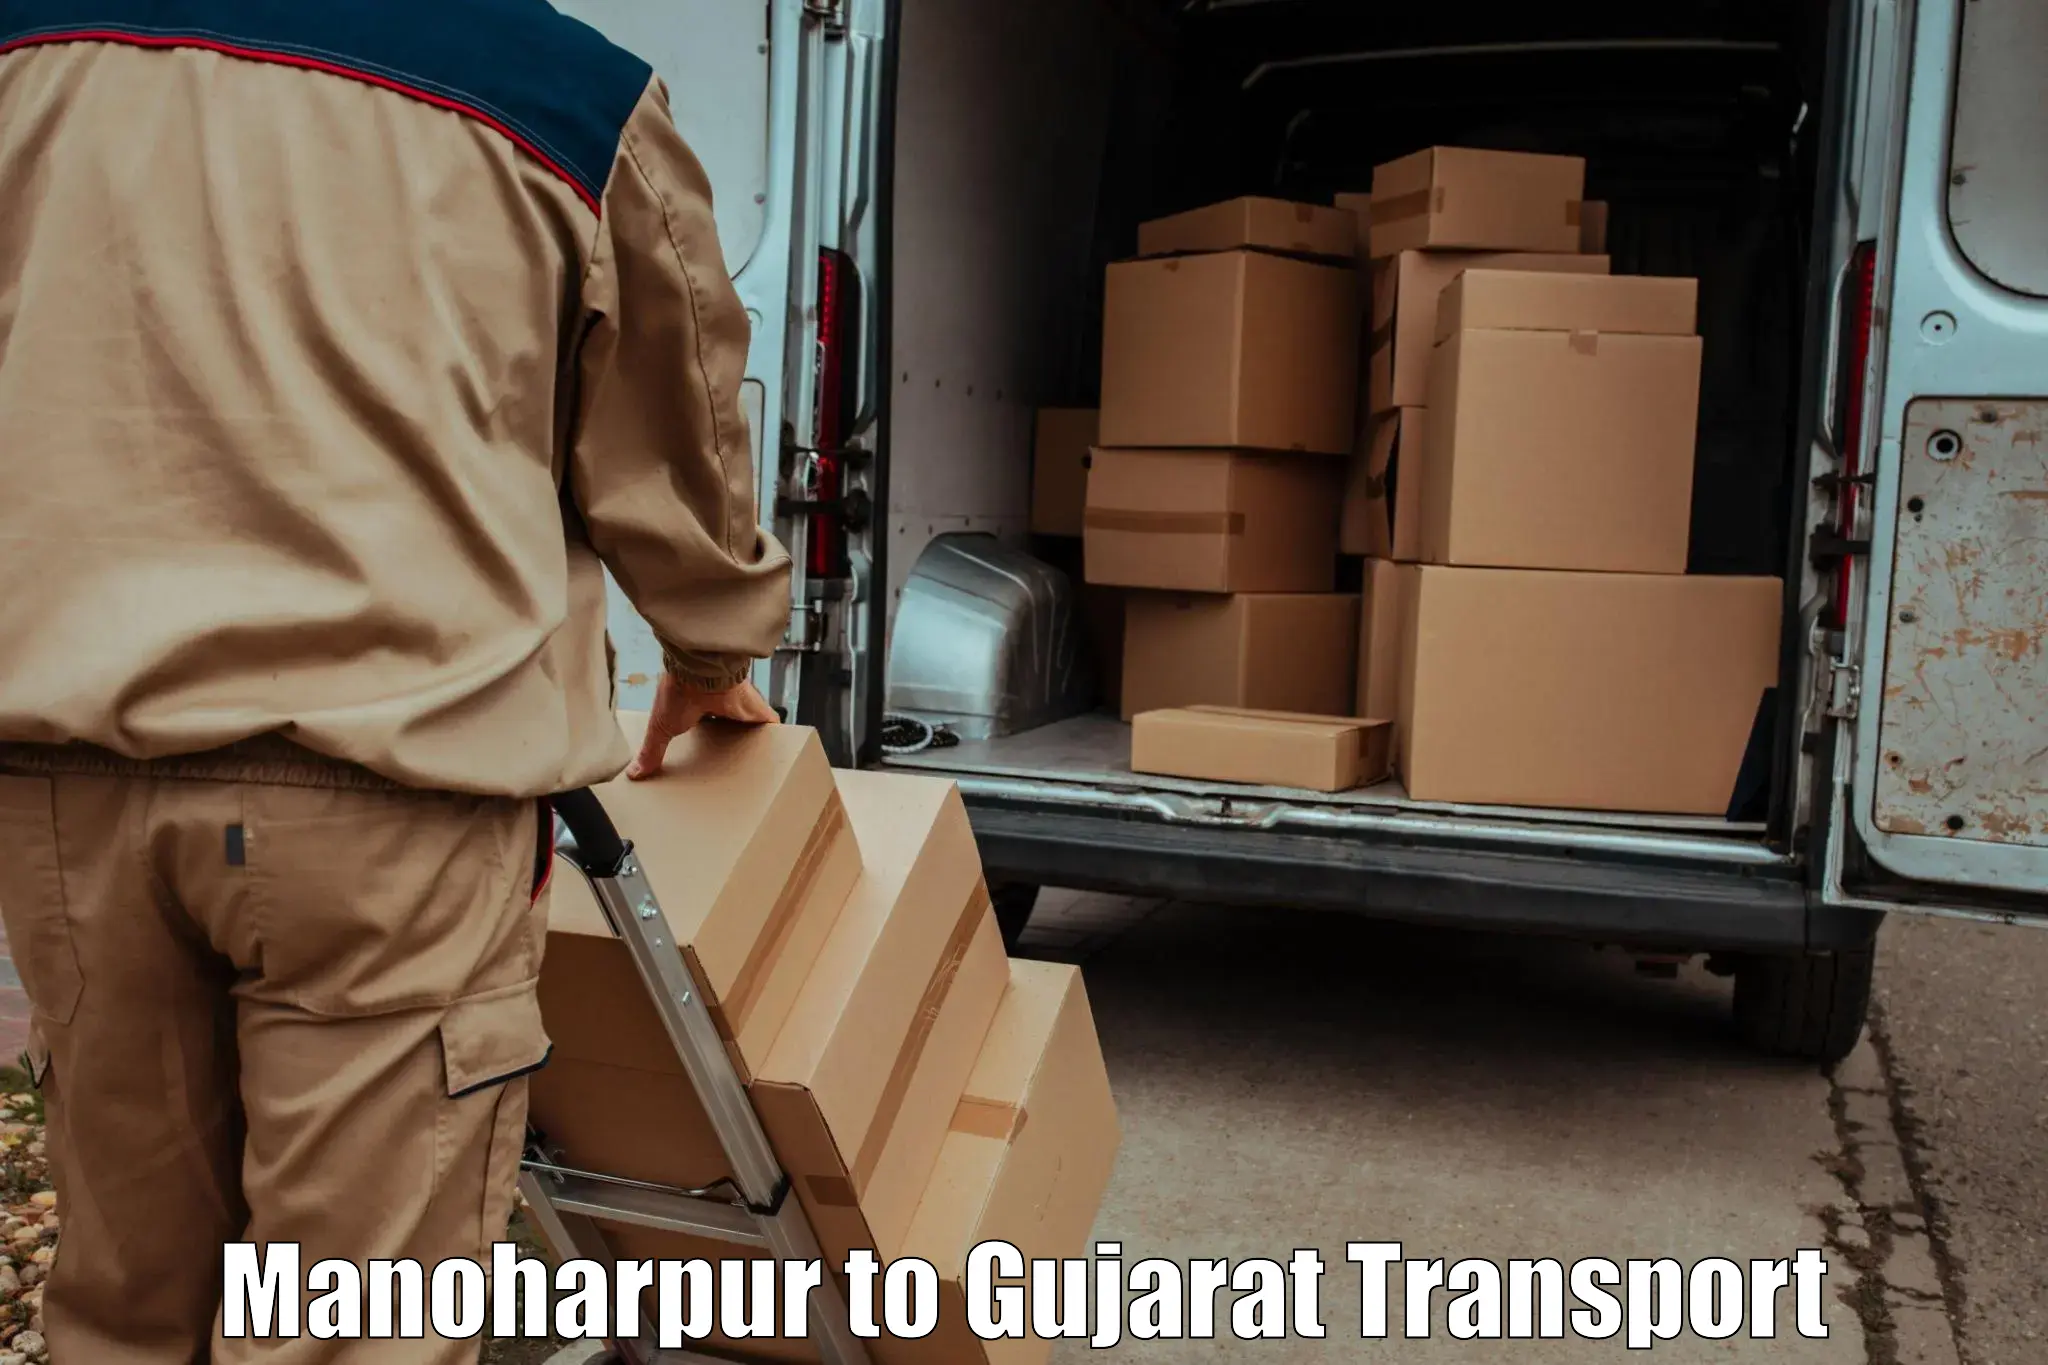 Delivery service Manoharpur to Jetpur